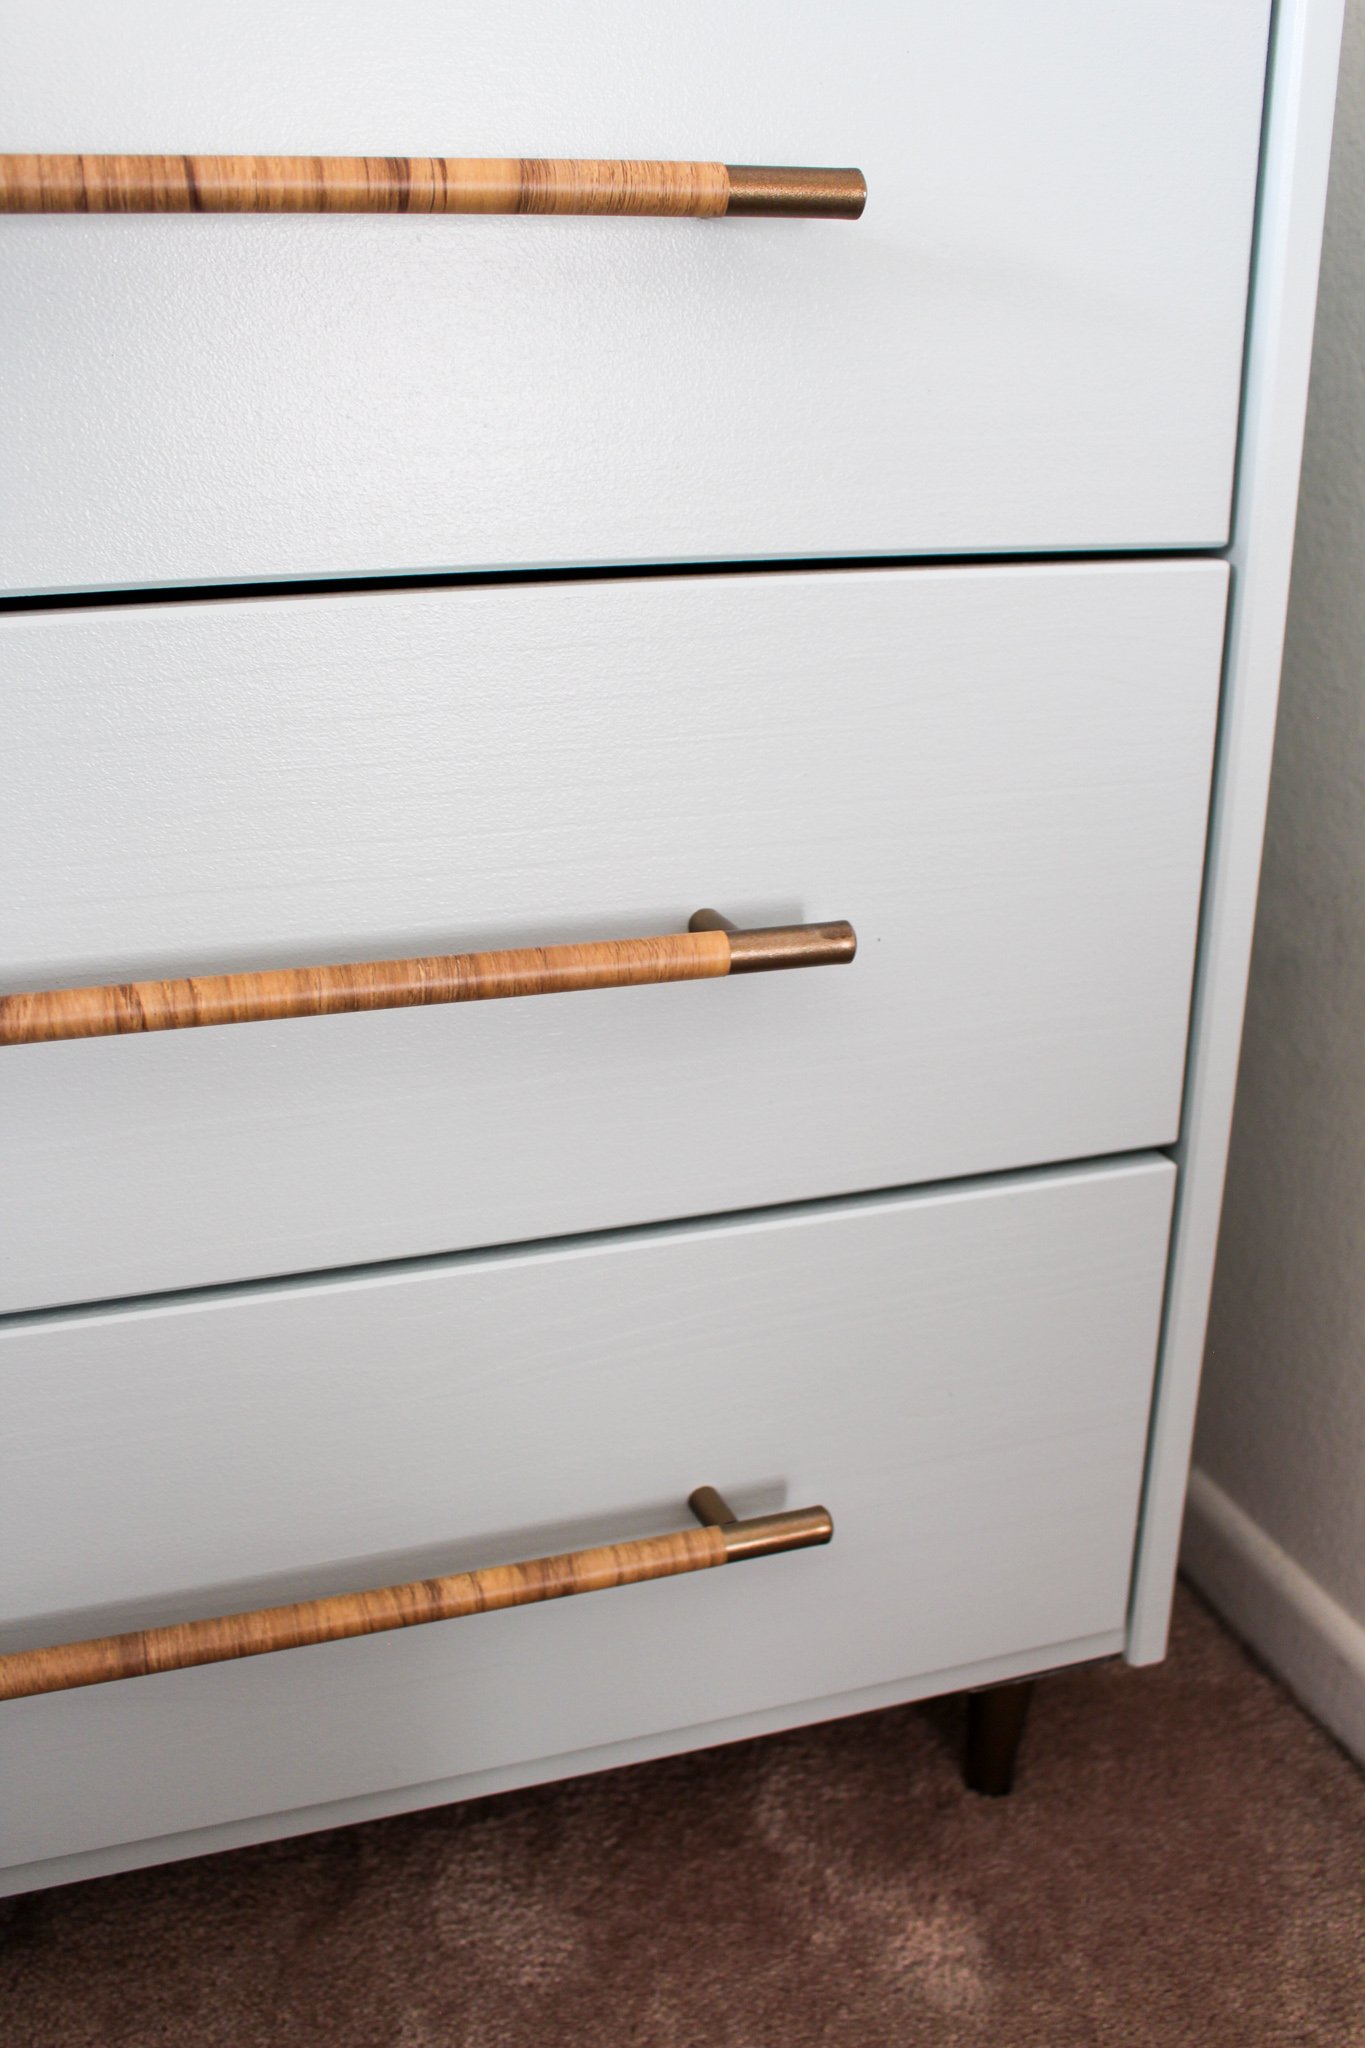 How to Line Your Dresser Drawers